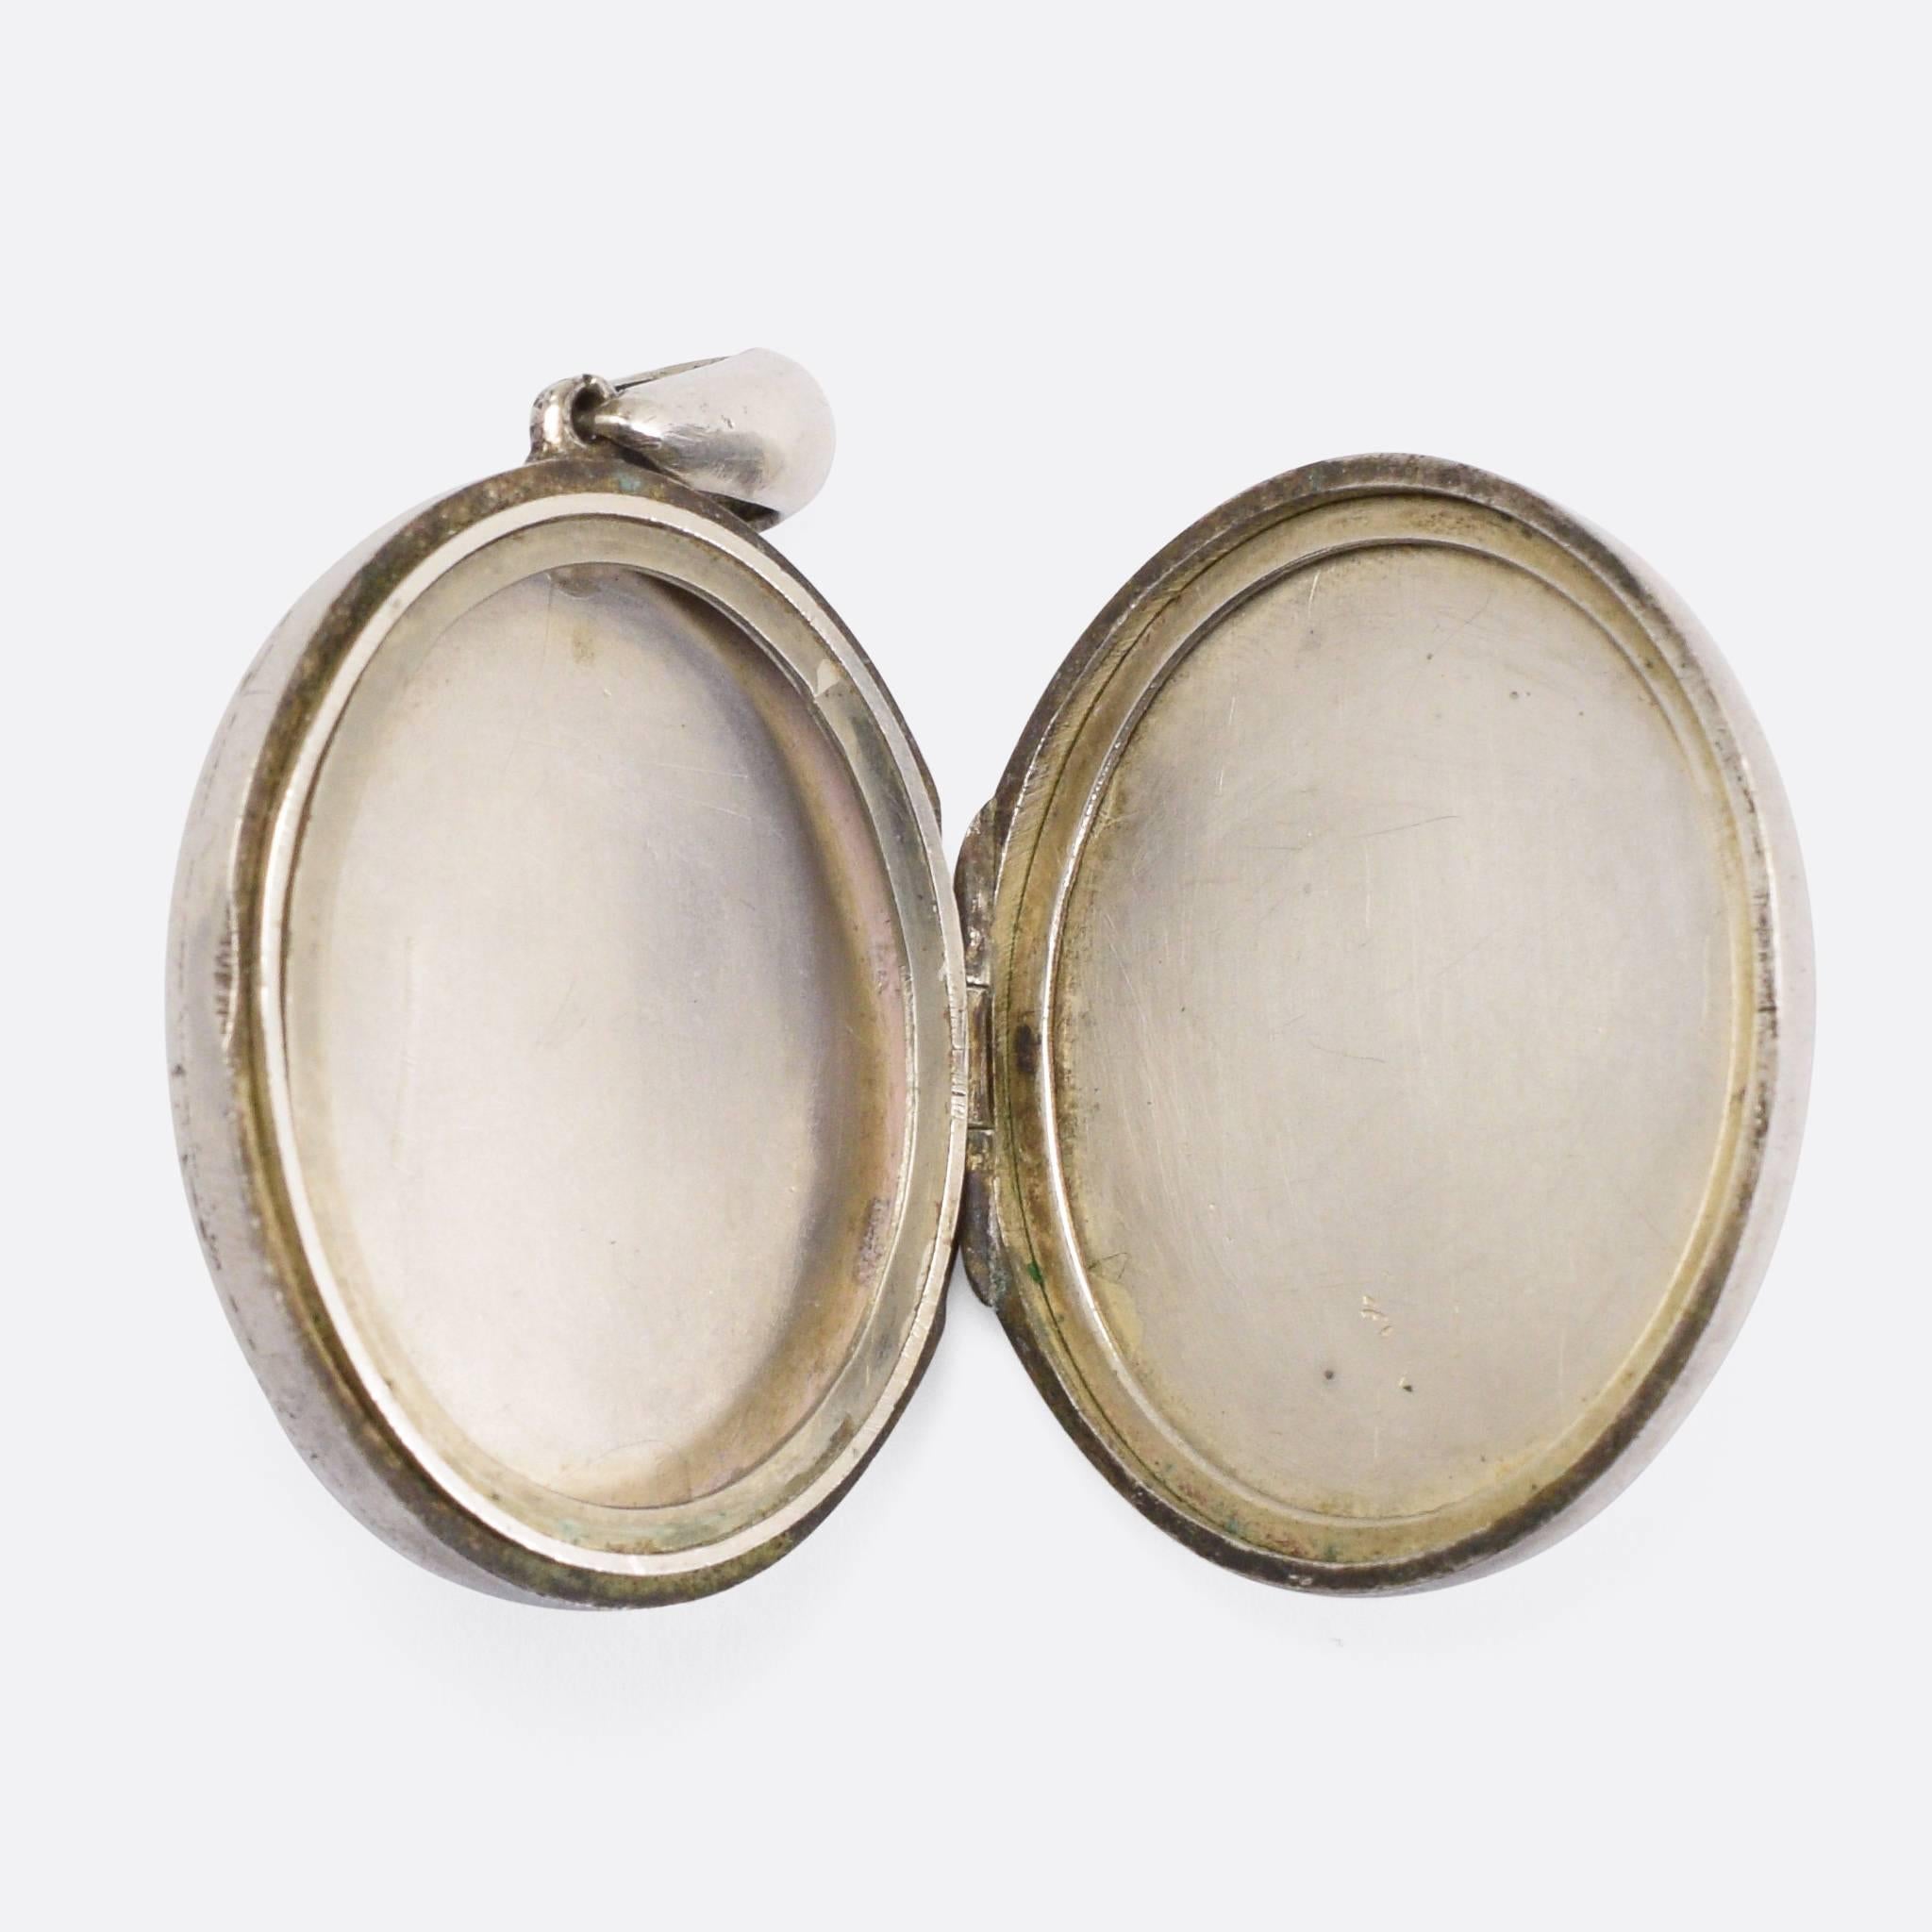 An attractive late Victorian sterling Silver locket, with applied Japanesque detailing, so typical of the Aesthetic movement of the same period.